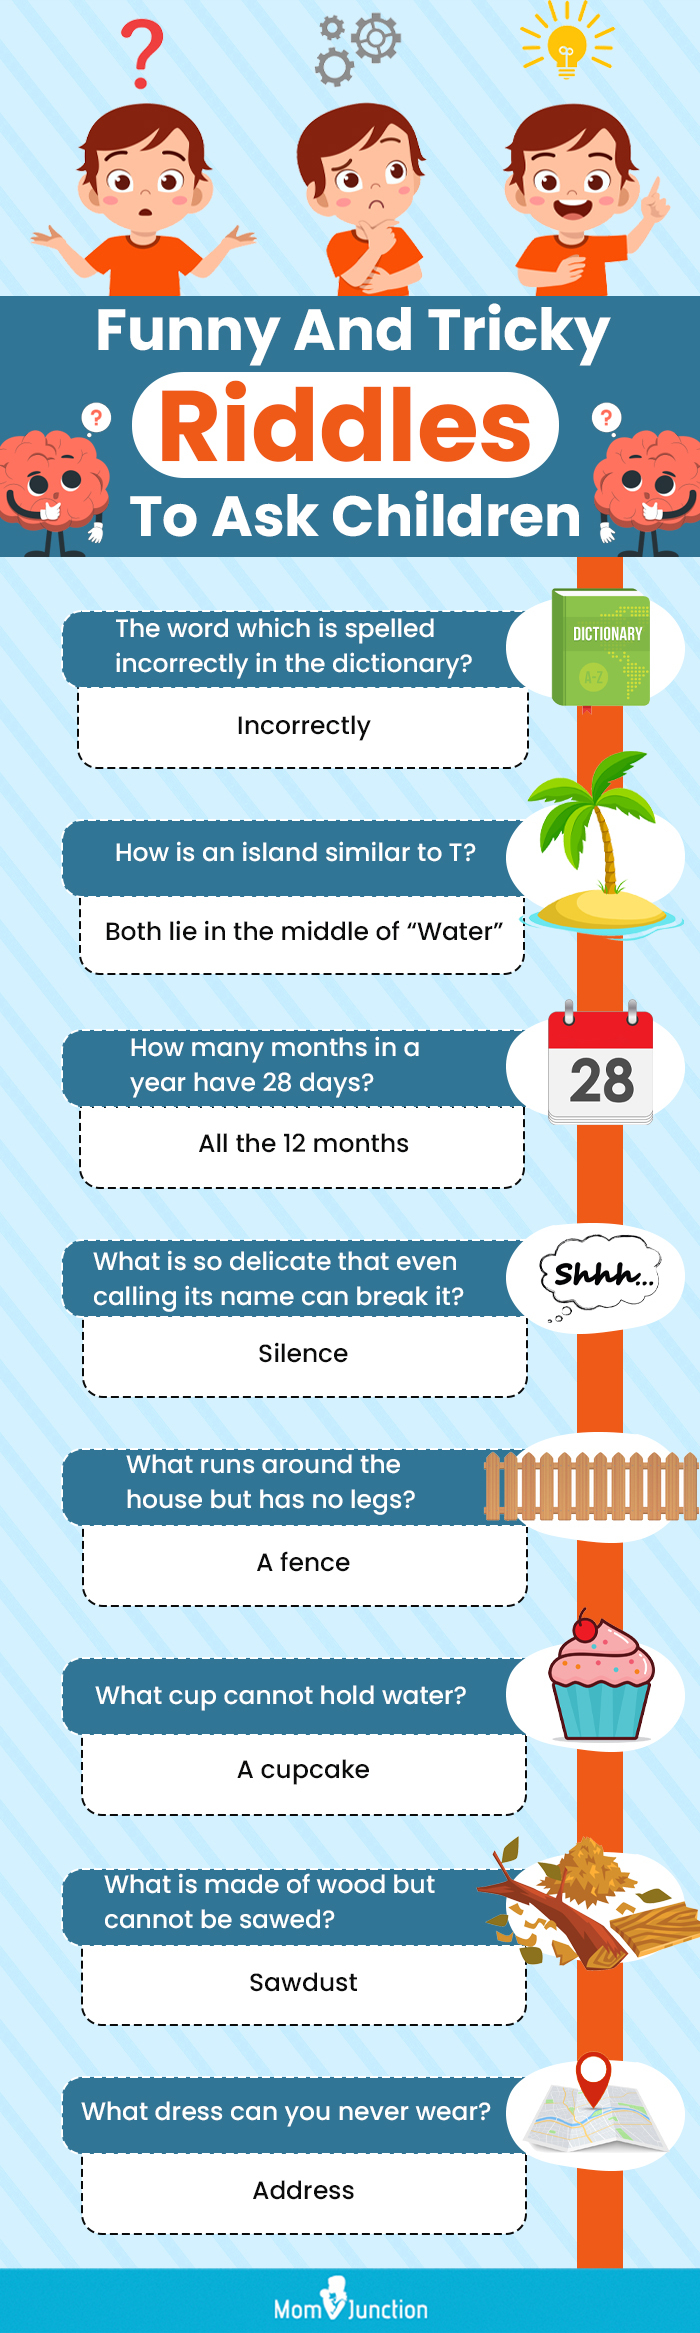 funny and tricky riddles to ask children (infographic)